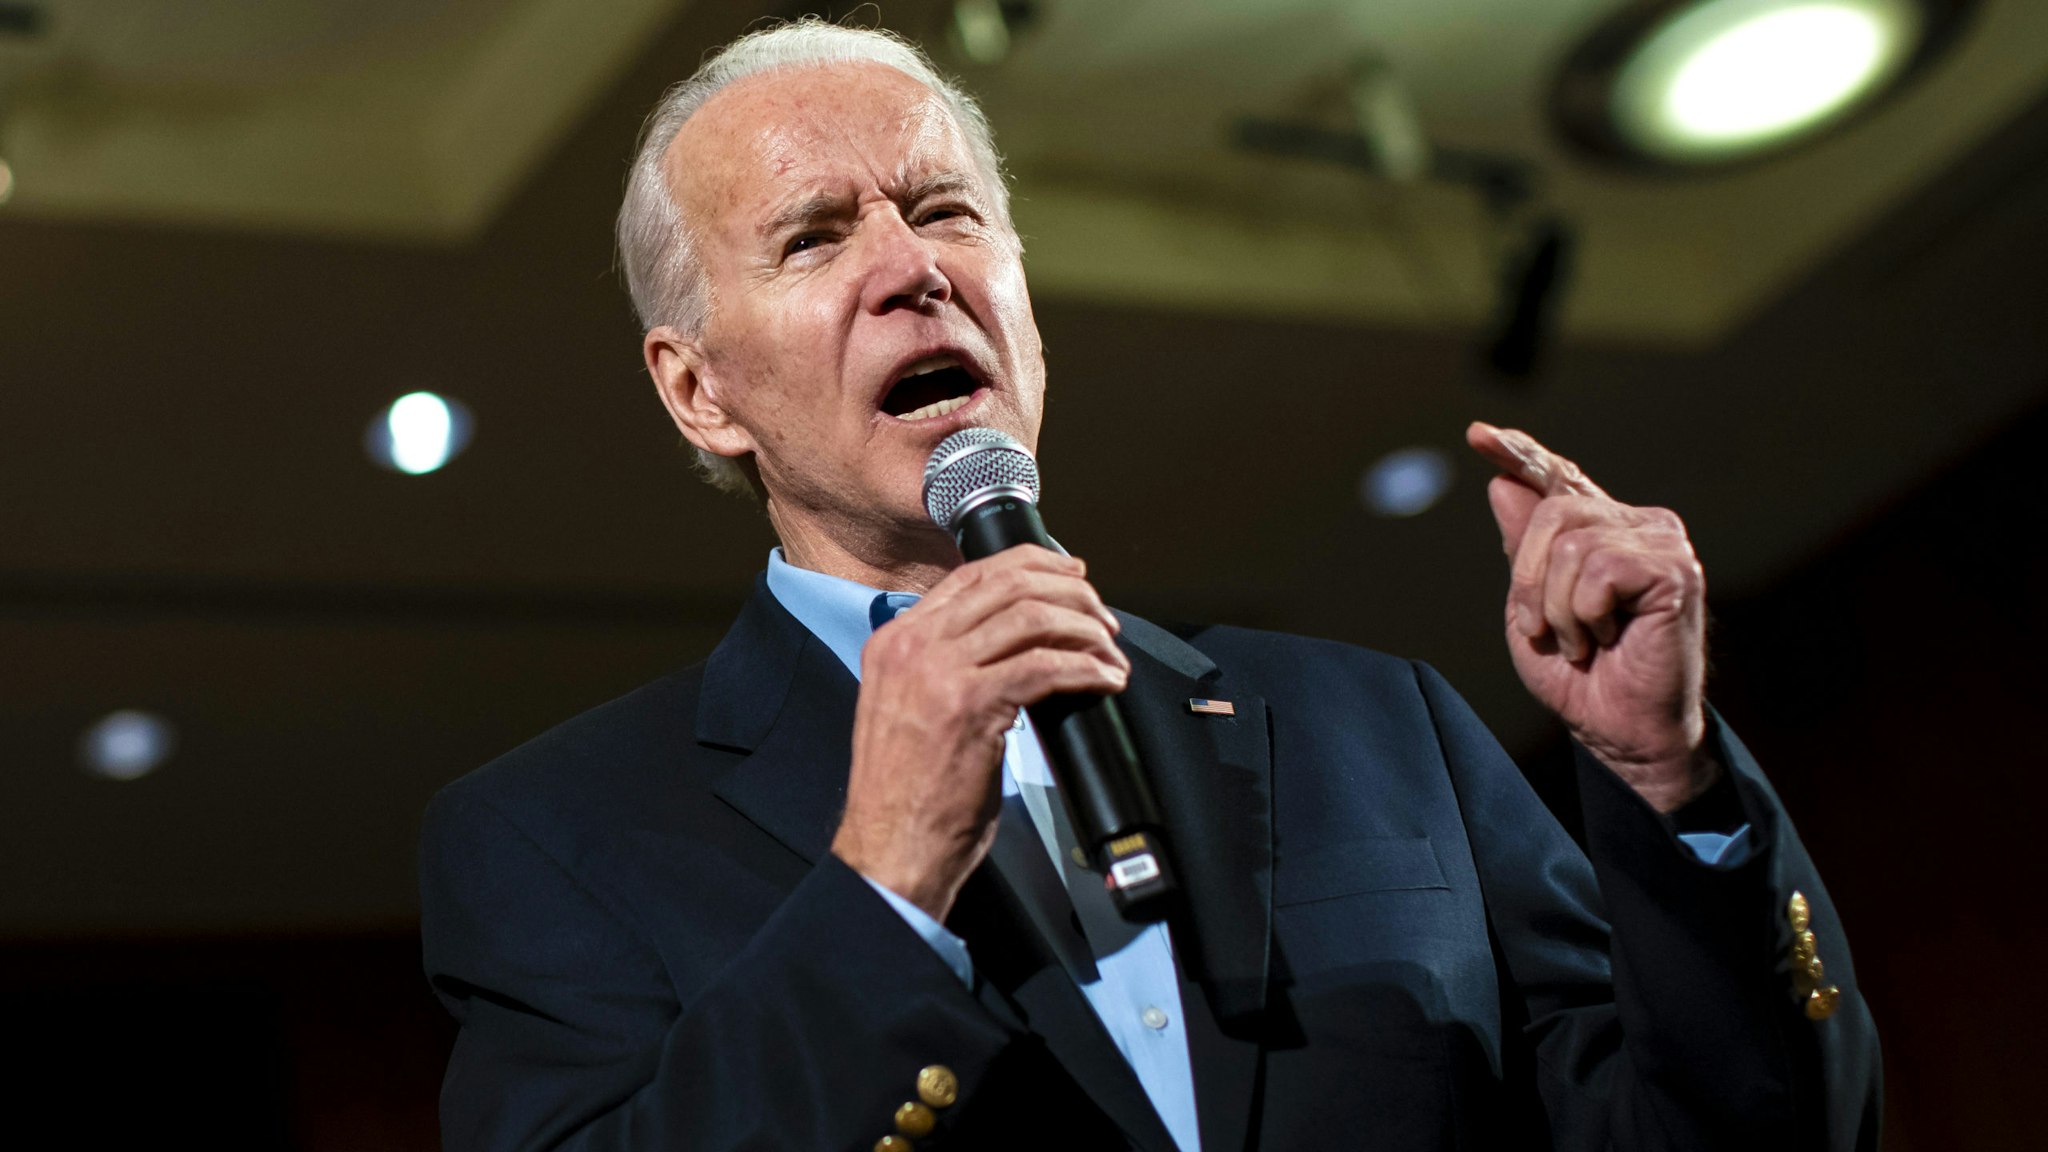 Former U.S. Vice President Joe Biden, 2020 Democratic presidential candidate, speaks during a campaign event in Iowa City, Iowa, U.S., on Monday, Jan. 27, 2020. Biden holds a sizable lead nationally, but many polls show Democrats in the early-voting states favor Bernie Sanders, which could spark the Vermont senator's campaign for the contests ahead.